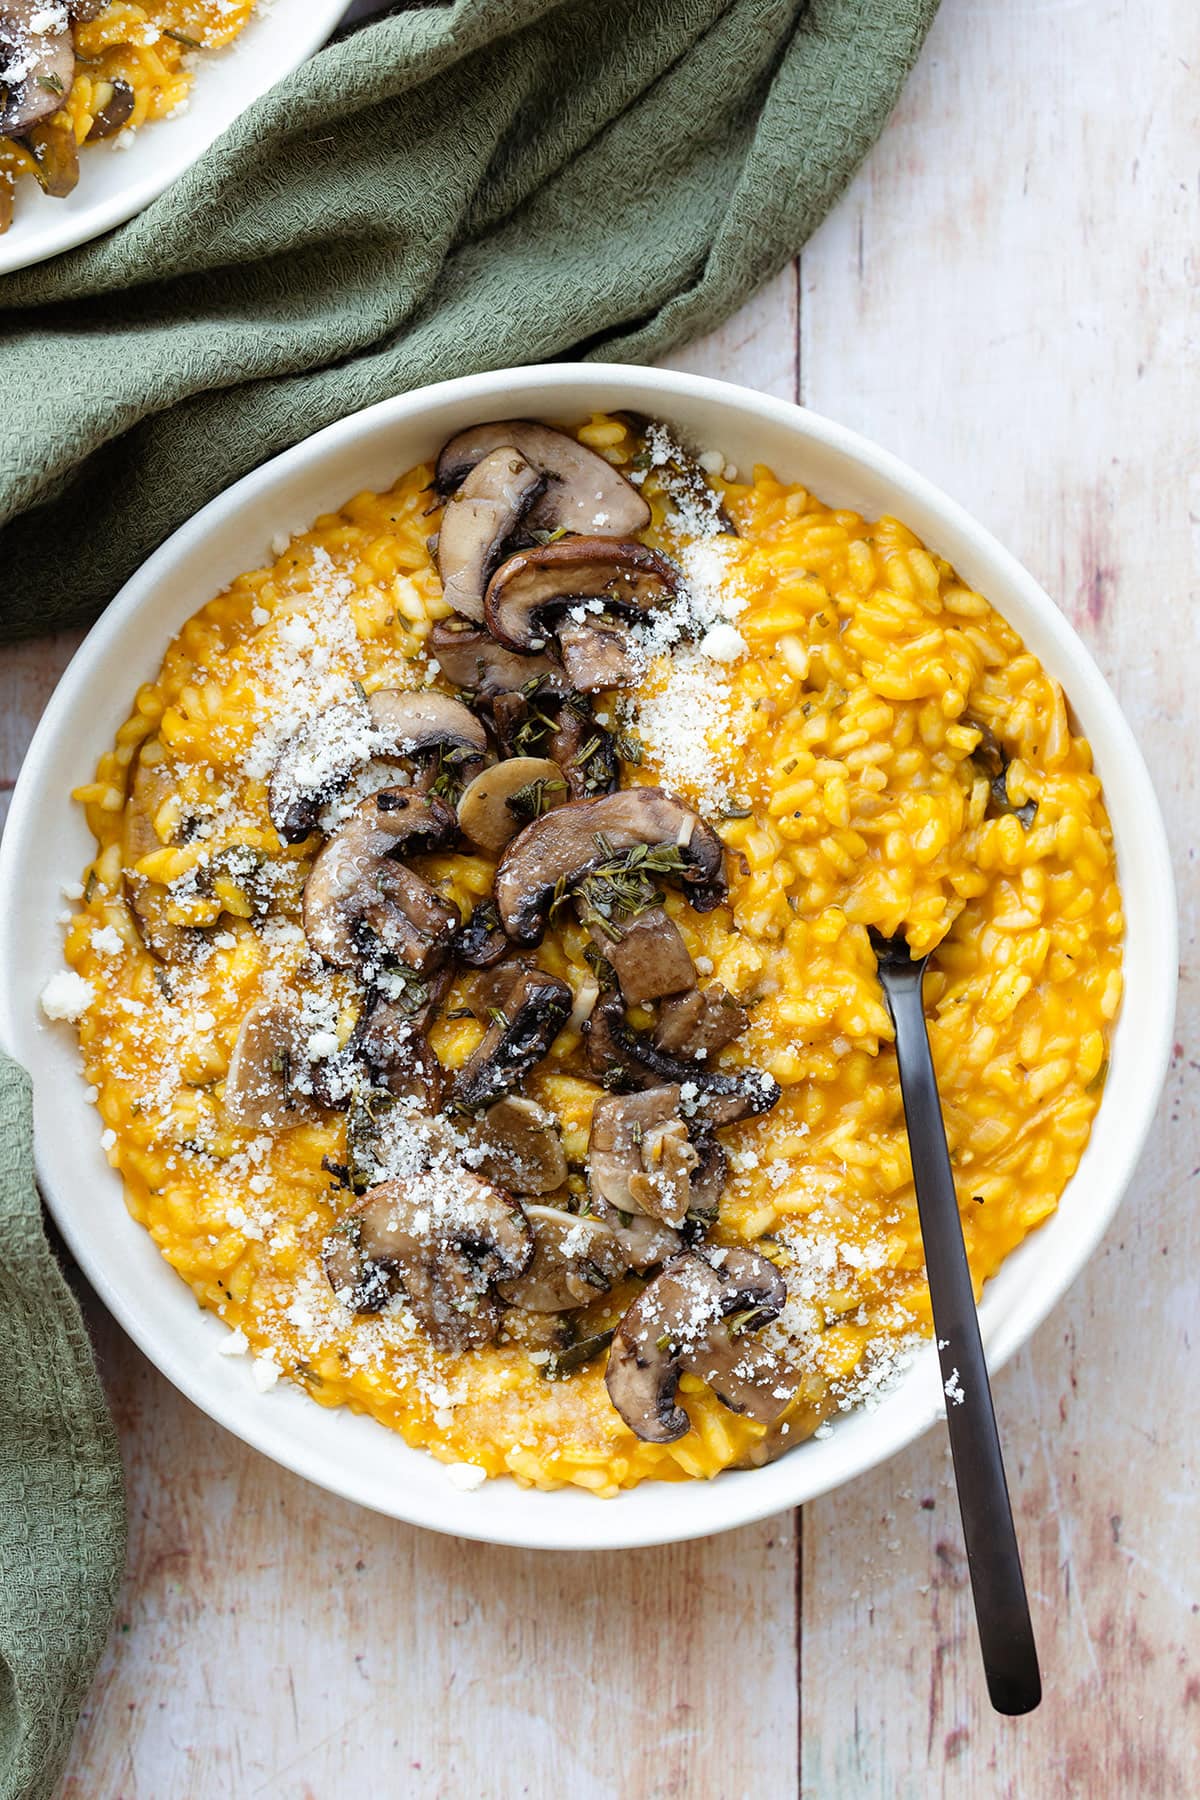 Pumpkin risotto topped with sauteed mushroom in a white plate with a black fork.